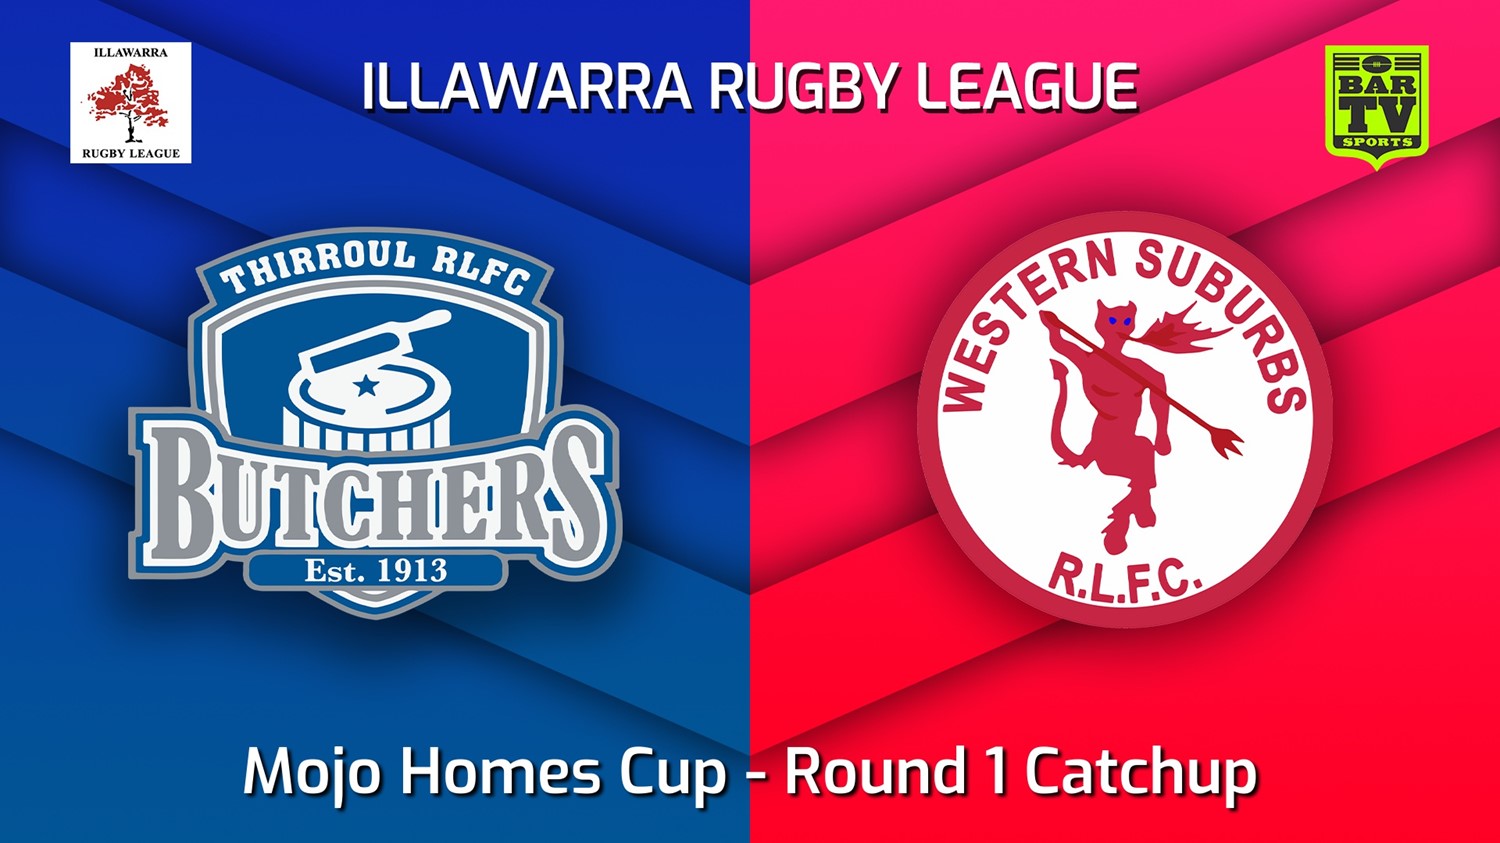 220611-Illawarra Round 1 Catchup - Mojo Homes Cup - Thirroul Butchers v Western Suburbs Devils Slate Image